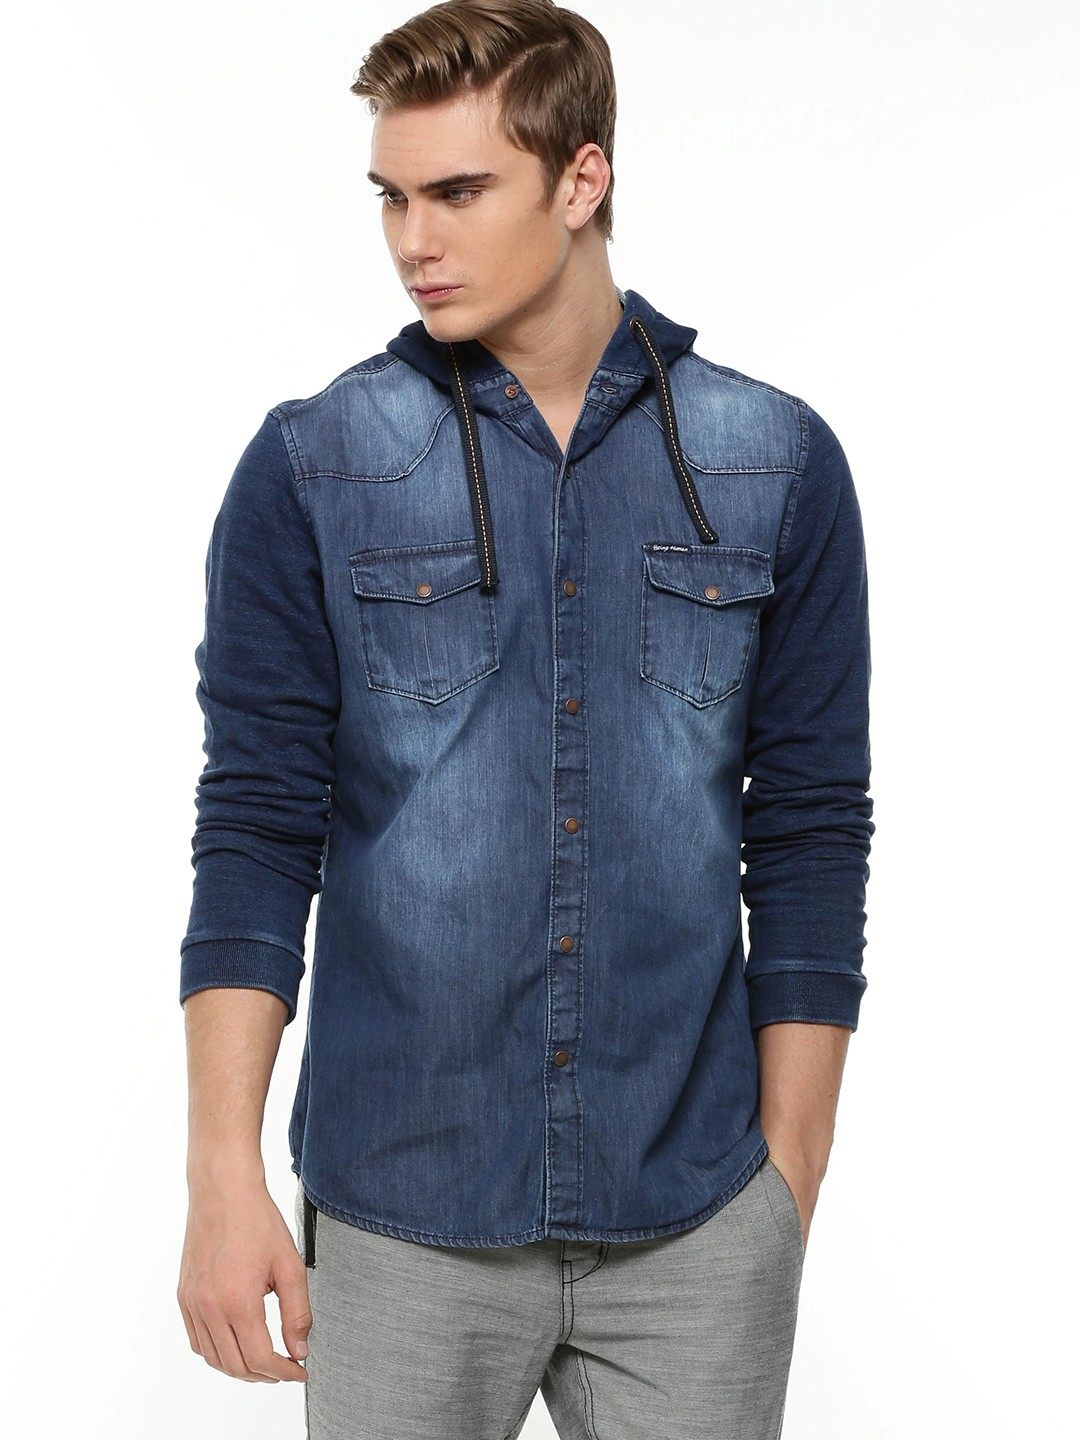 DNMSRT ID 003 – 100% Cotton Hooded Denim Shirt With Knit Sleeves ...